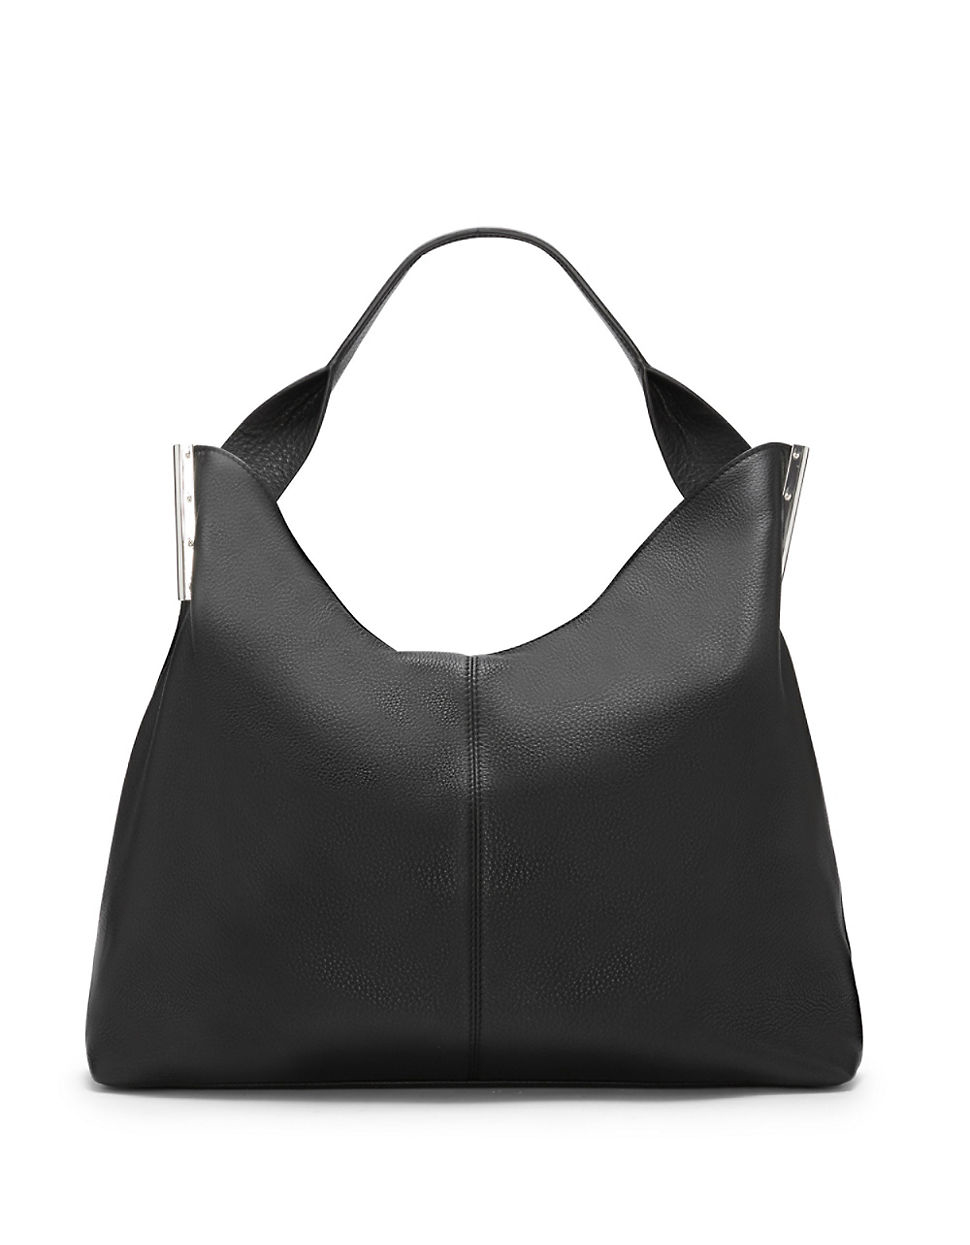 Vince Camuto Tina Leather Hobo Bag in Black - Lyst